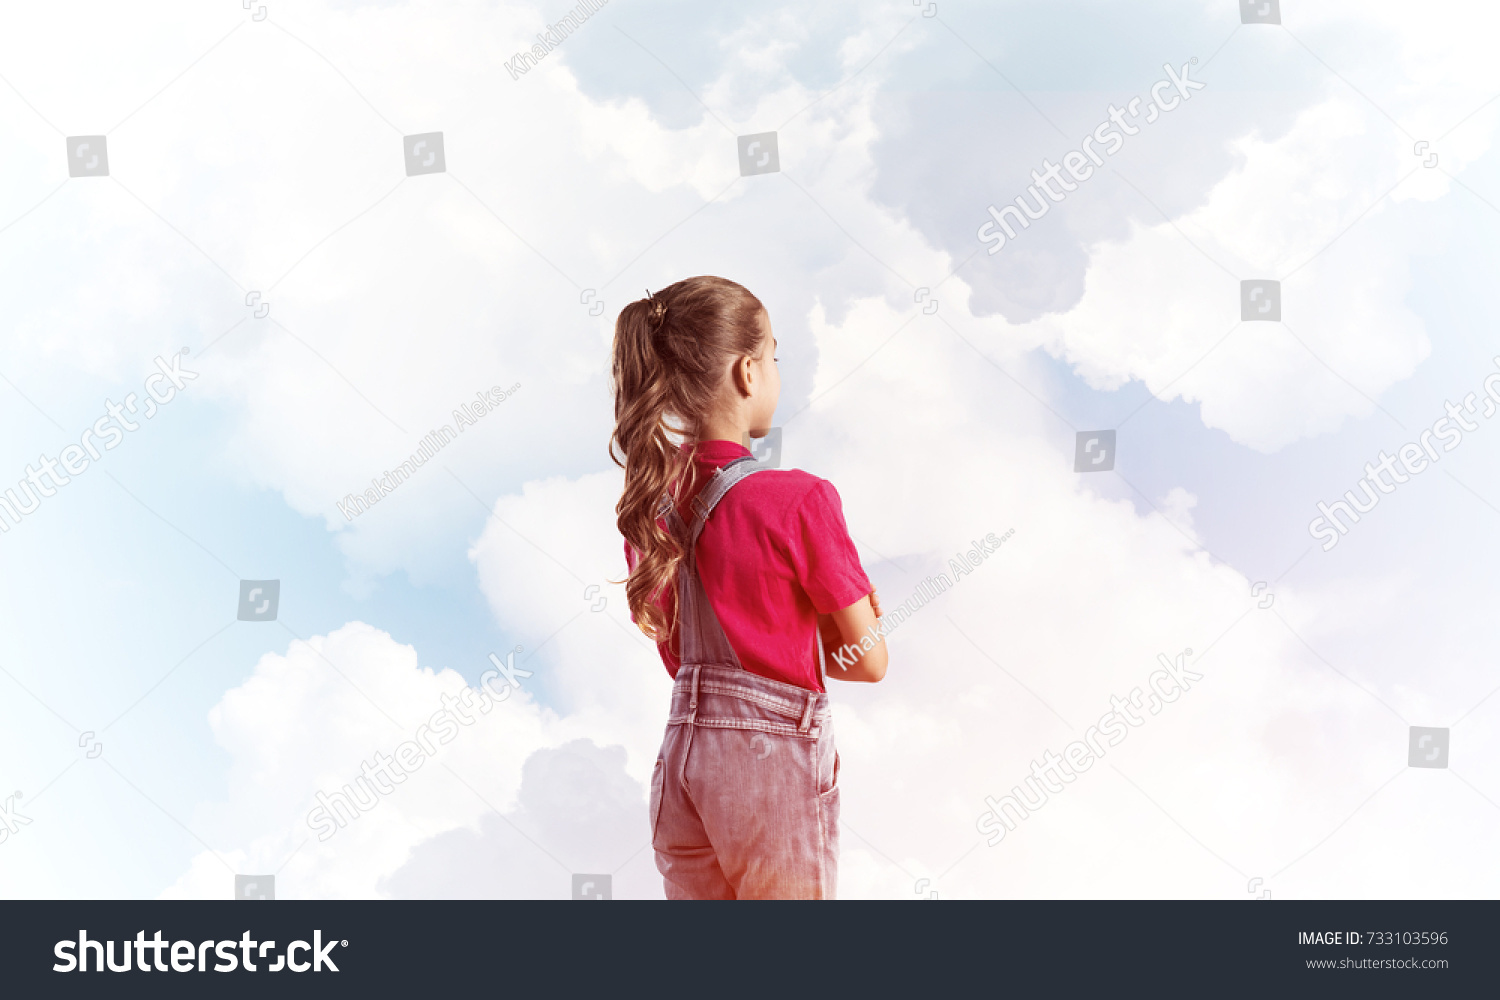 Little cute girl in overalls against sky background dreaming about future #733103596